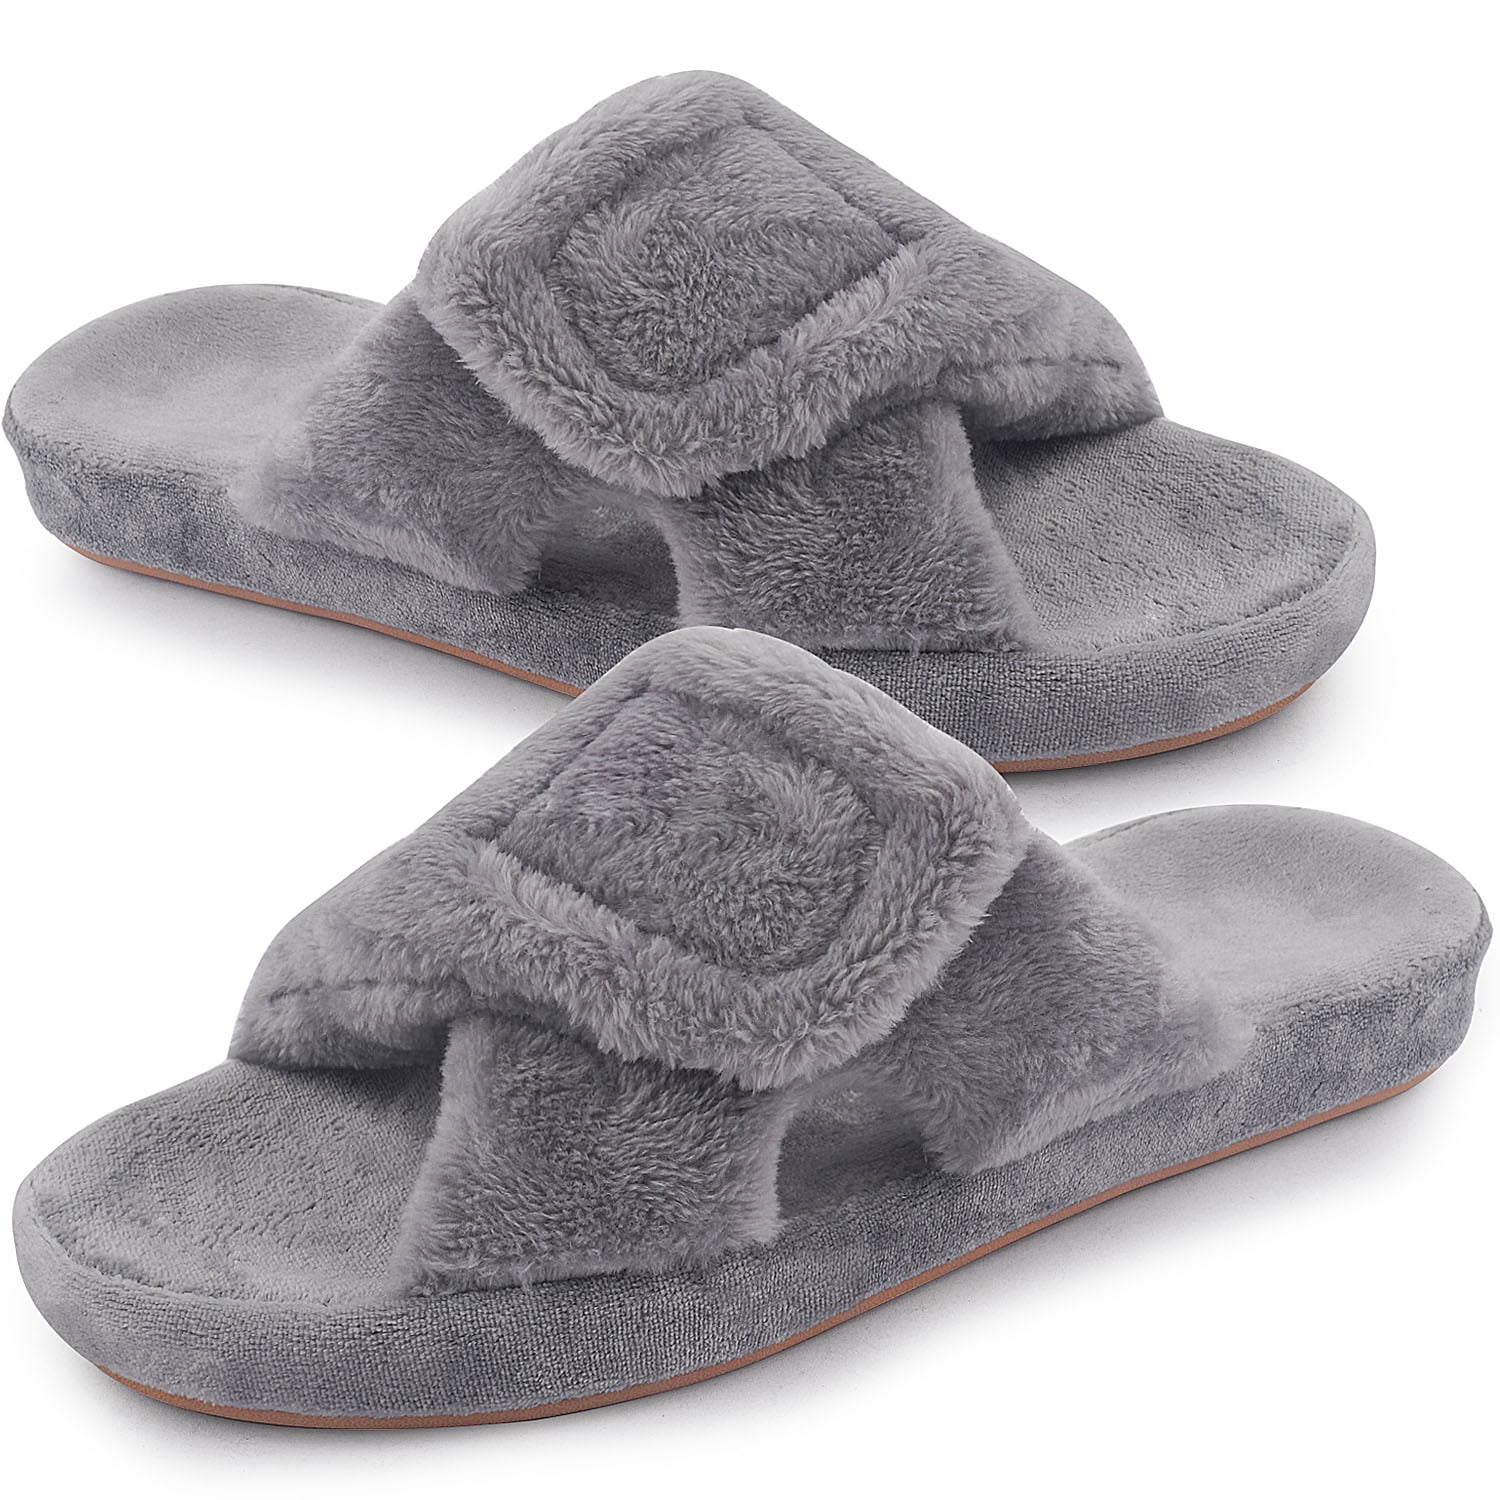 Women's Orthopedic Slippers with Arch Support, Soft Palestine | Ubuy